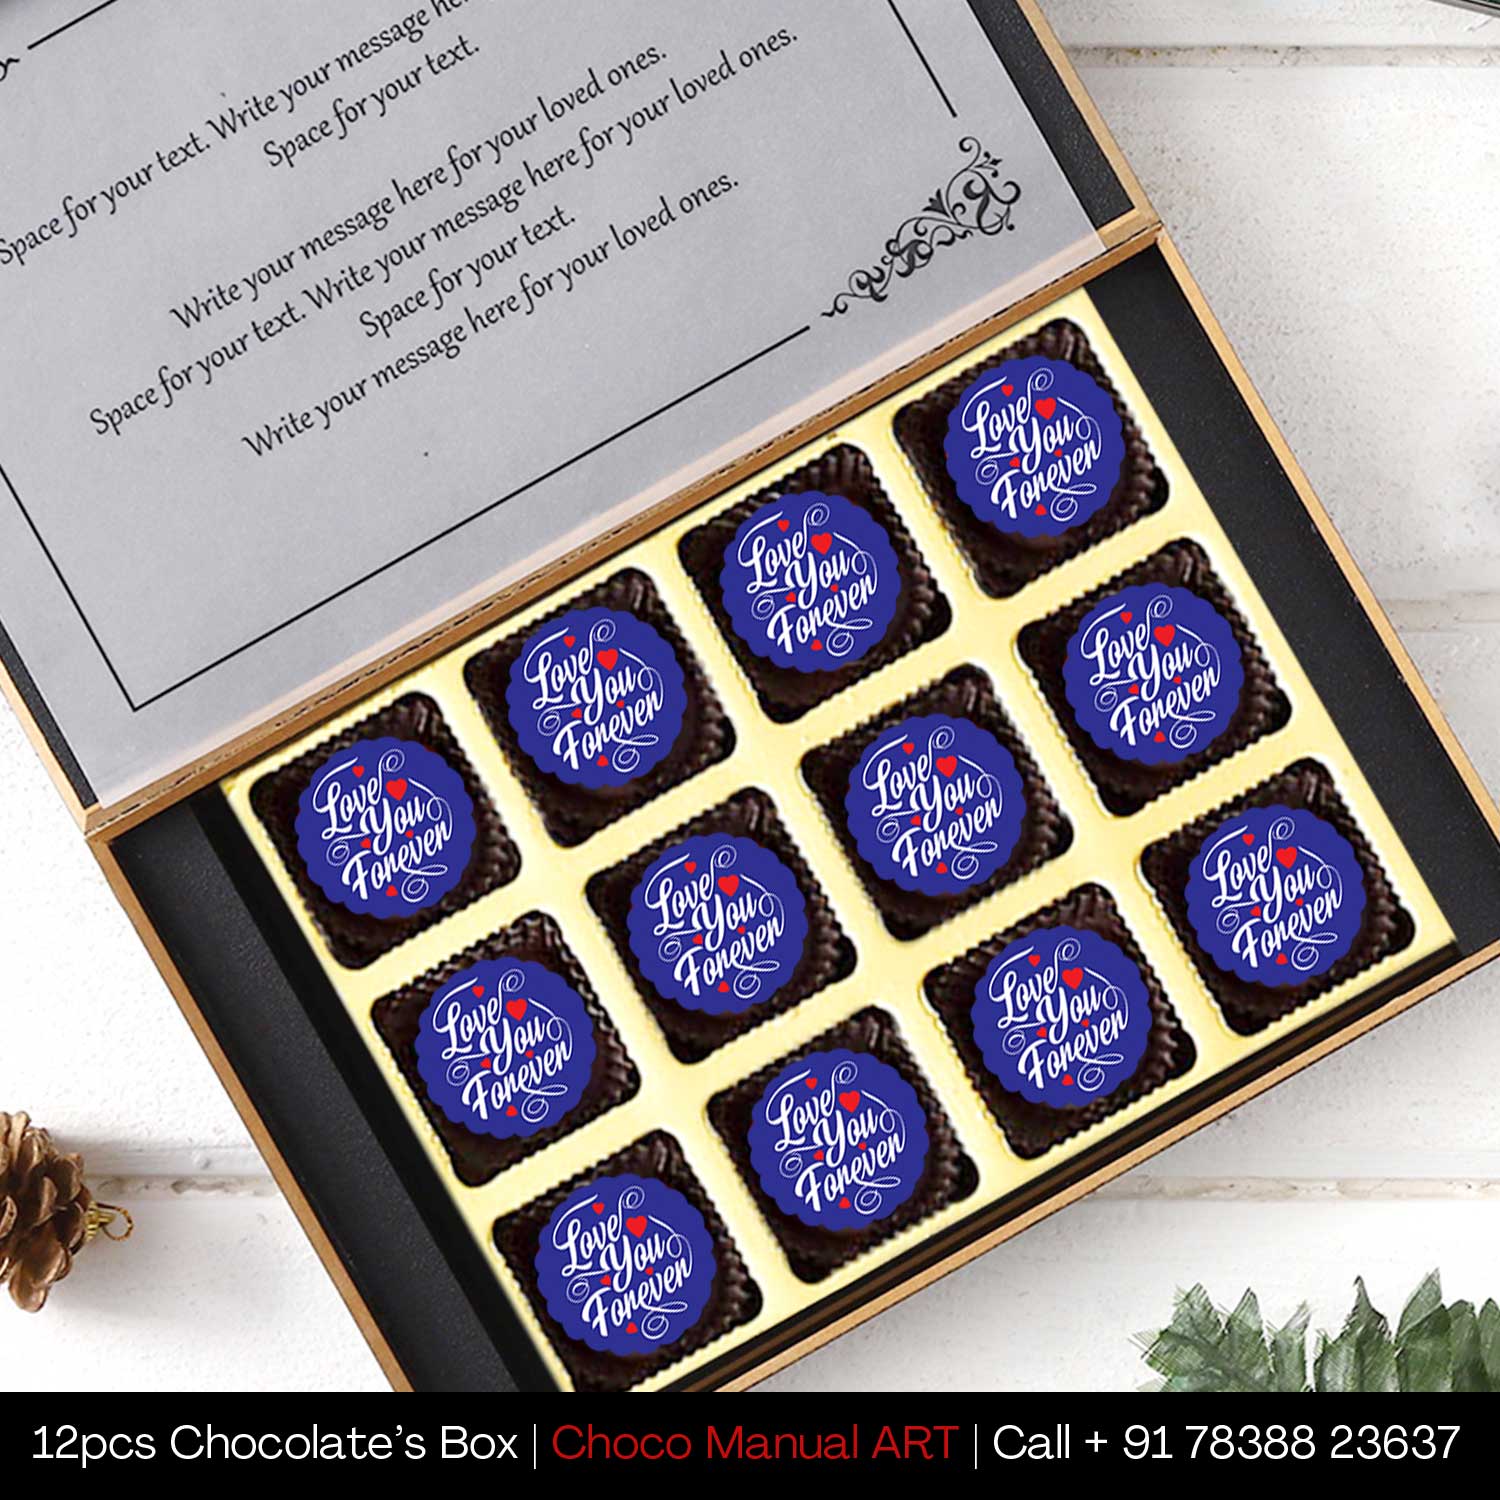 I Love You Printed Chocolate Box for your love - Choco ManualART